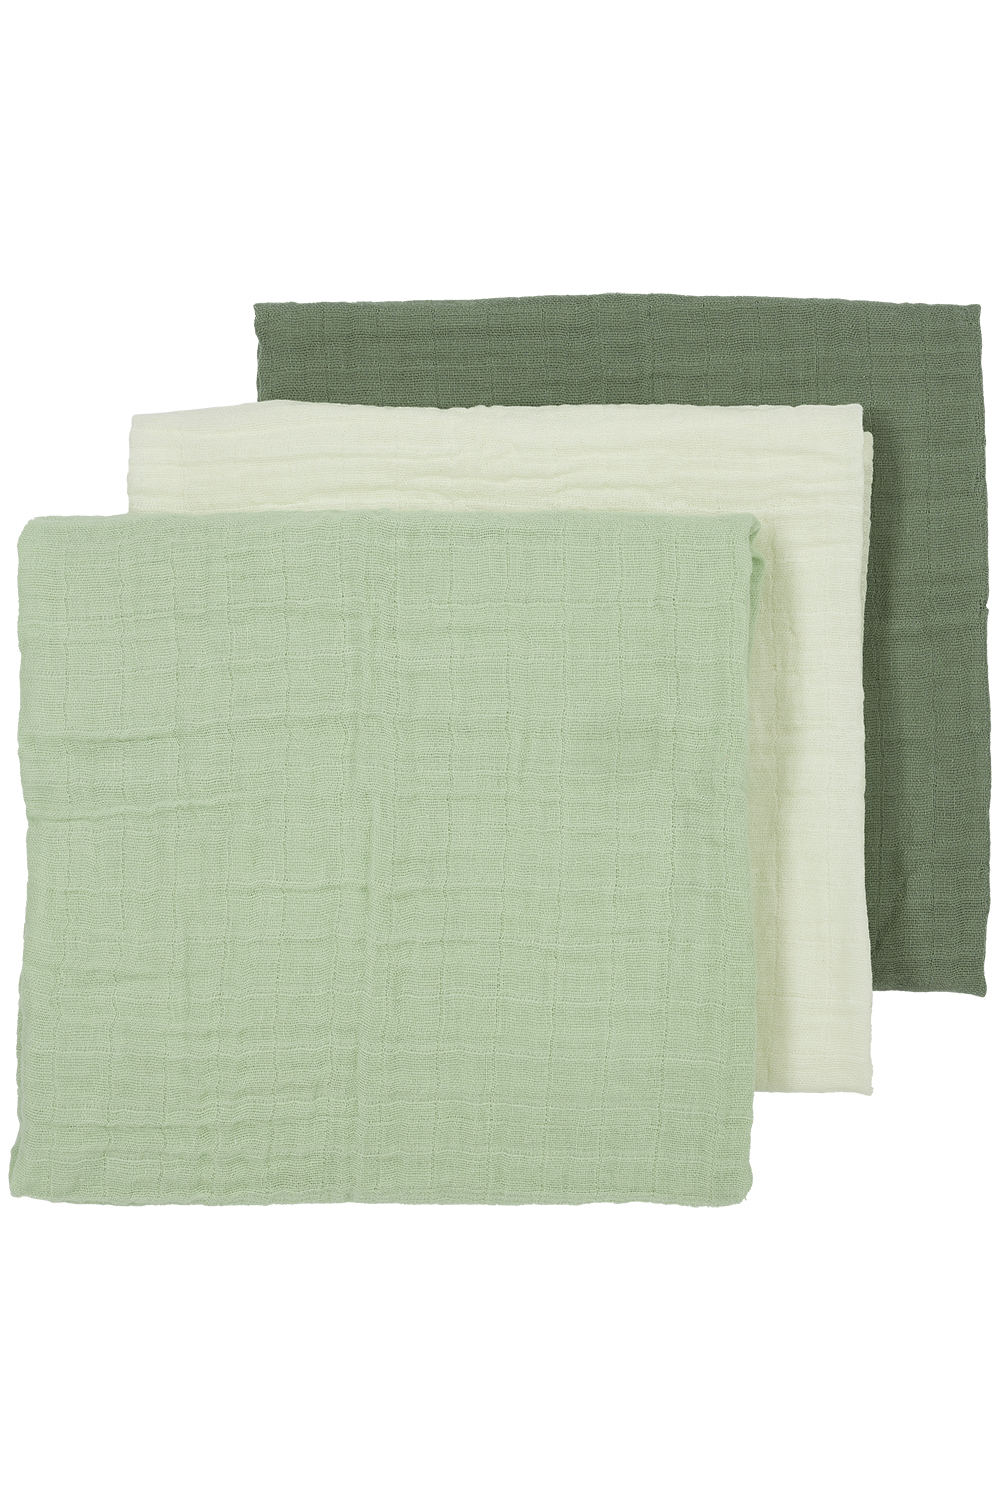 Pre-washed hydrofiele doeken 3-pack Uni - offwhite/soft green/forest green - 70x70cm